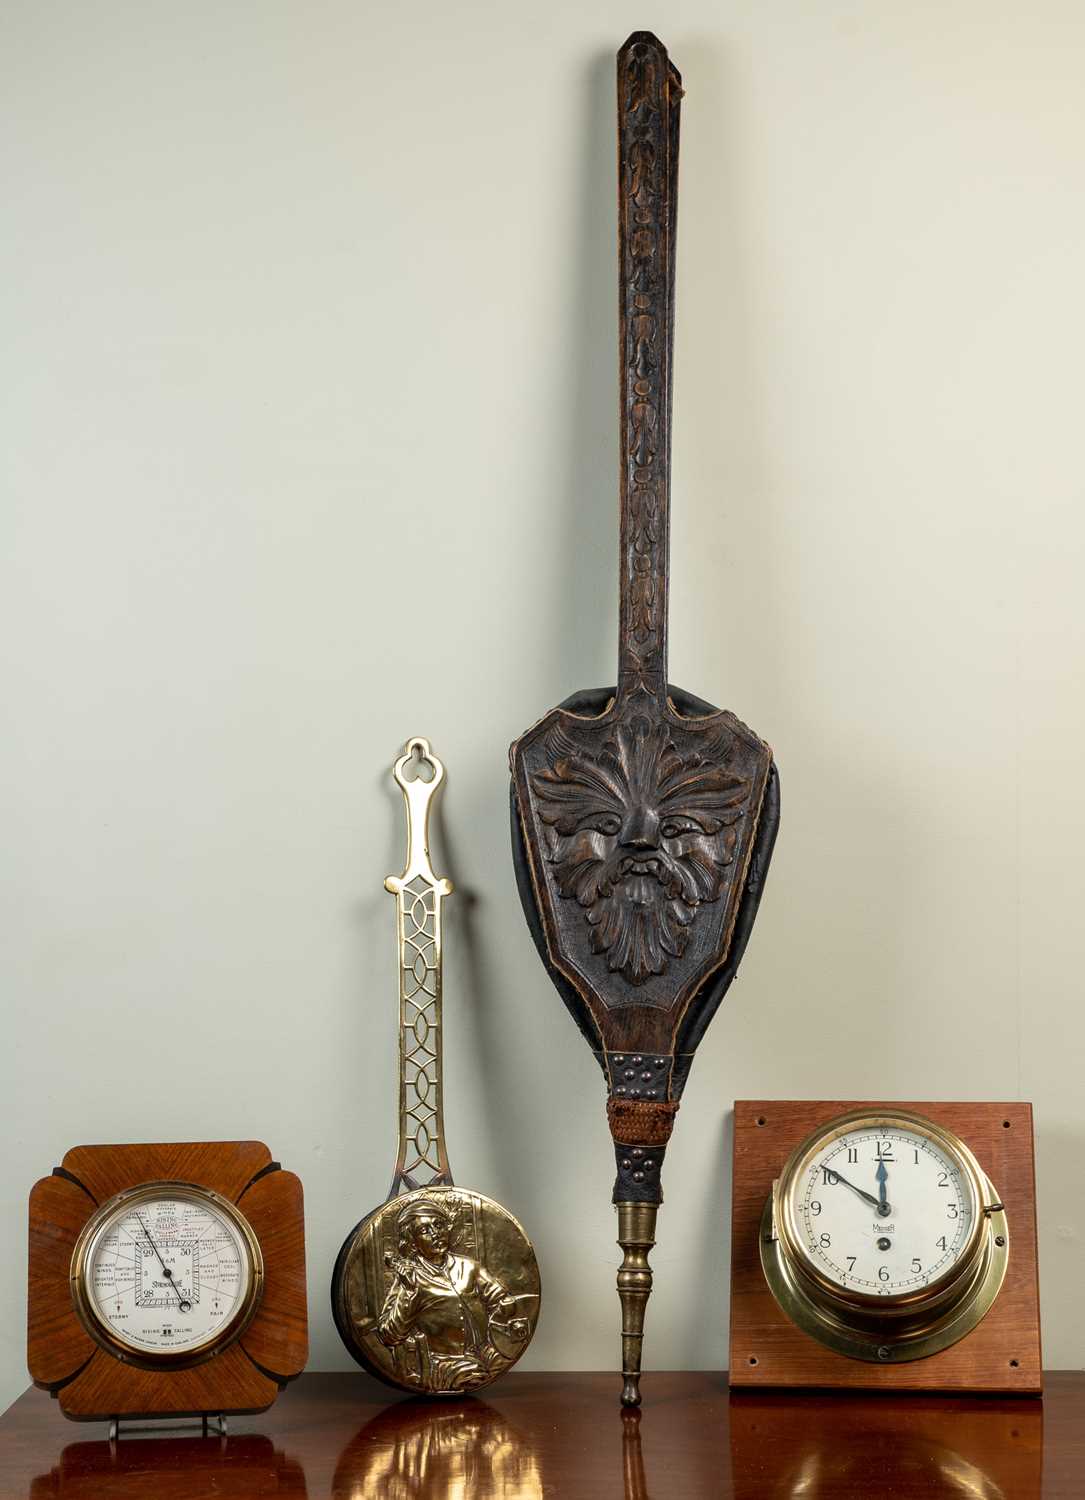 A brass ship's clock by Mercer, 20cm diameter mounted on a hardwood stand; together with a Short & - Image 2 of 2